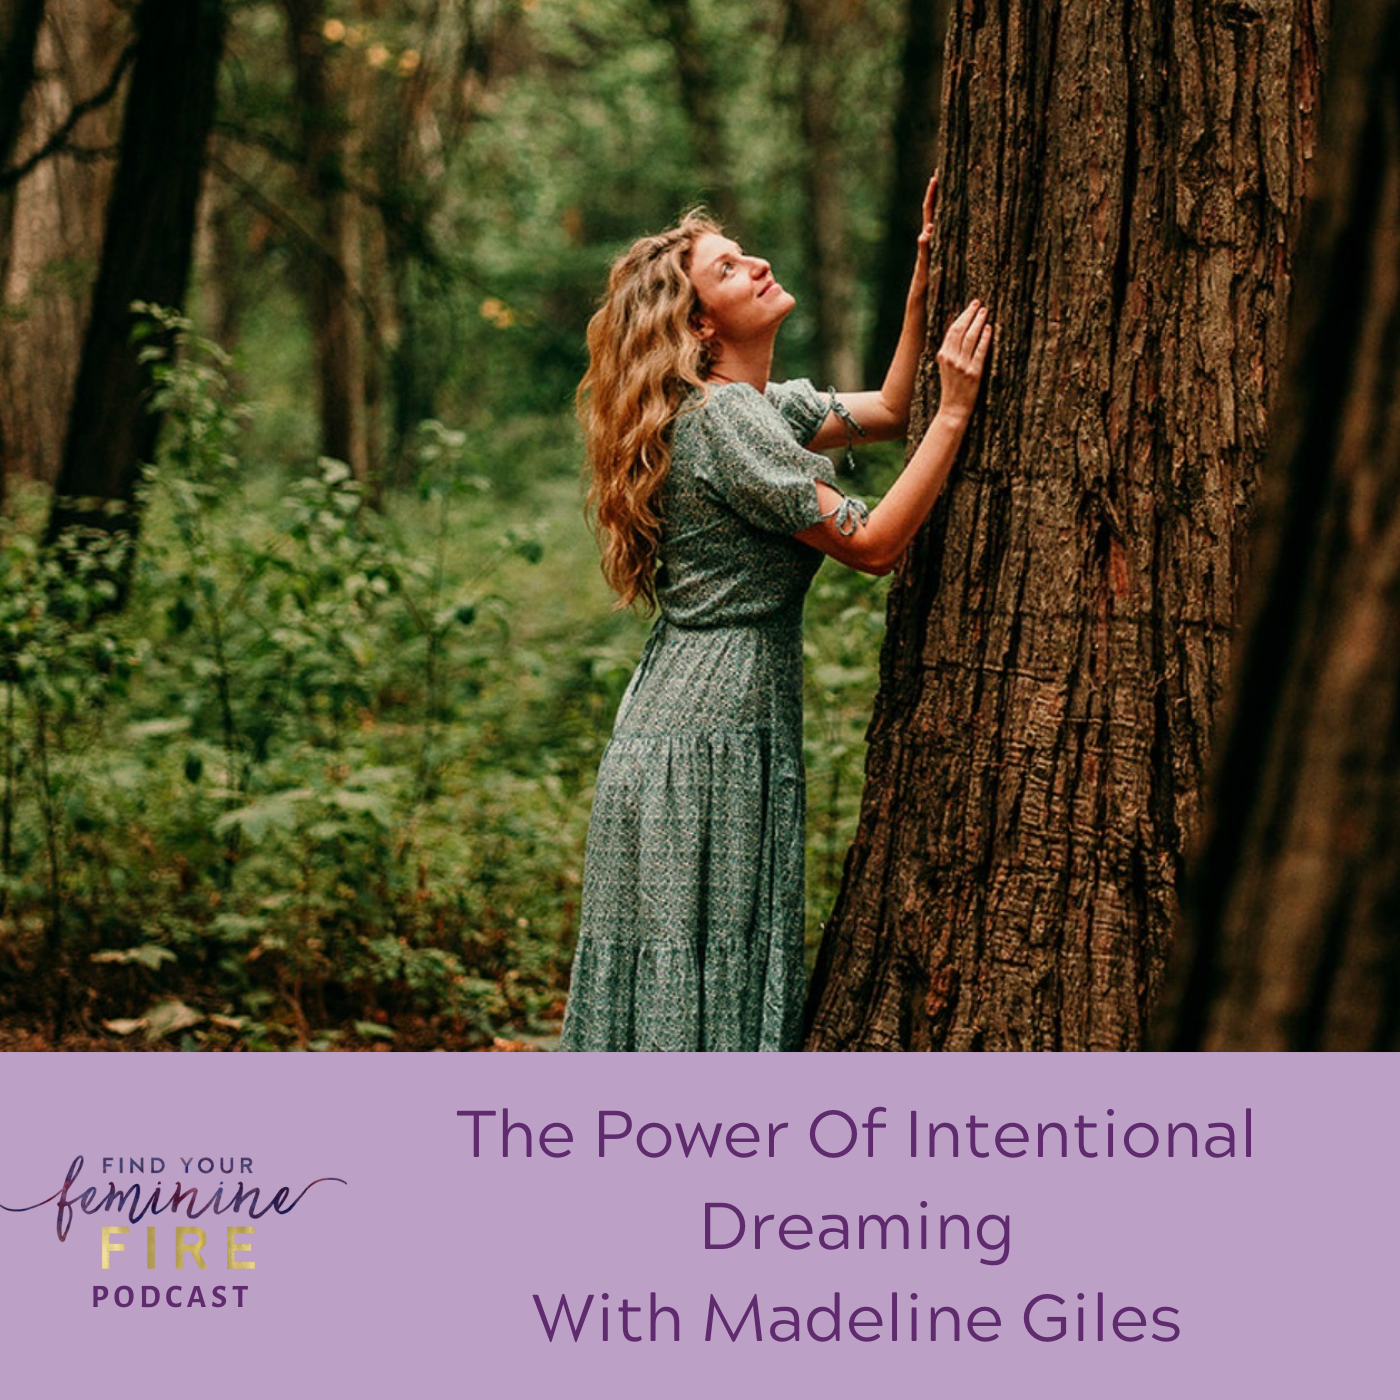 The Power Of Intentional Dreaming With Madeline Giles